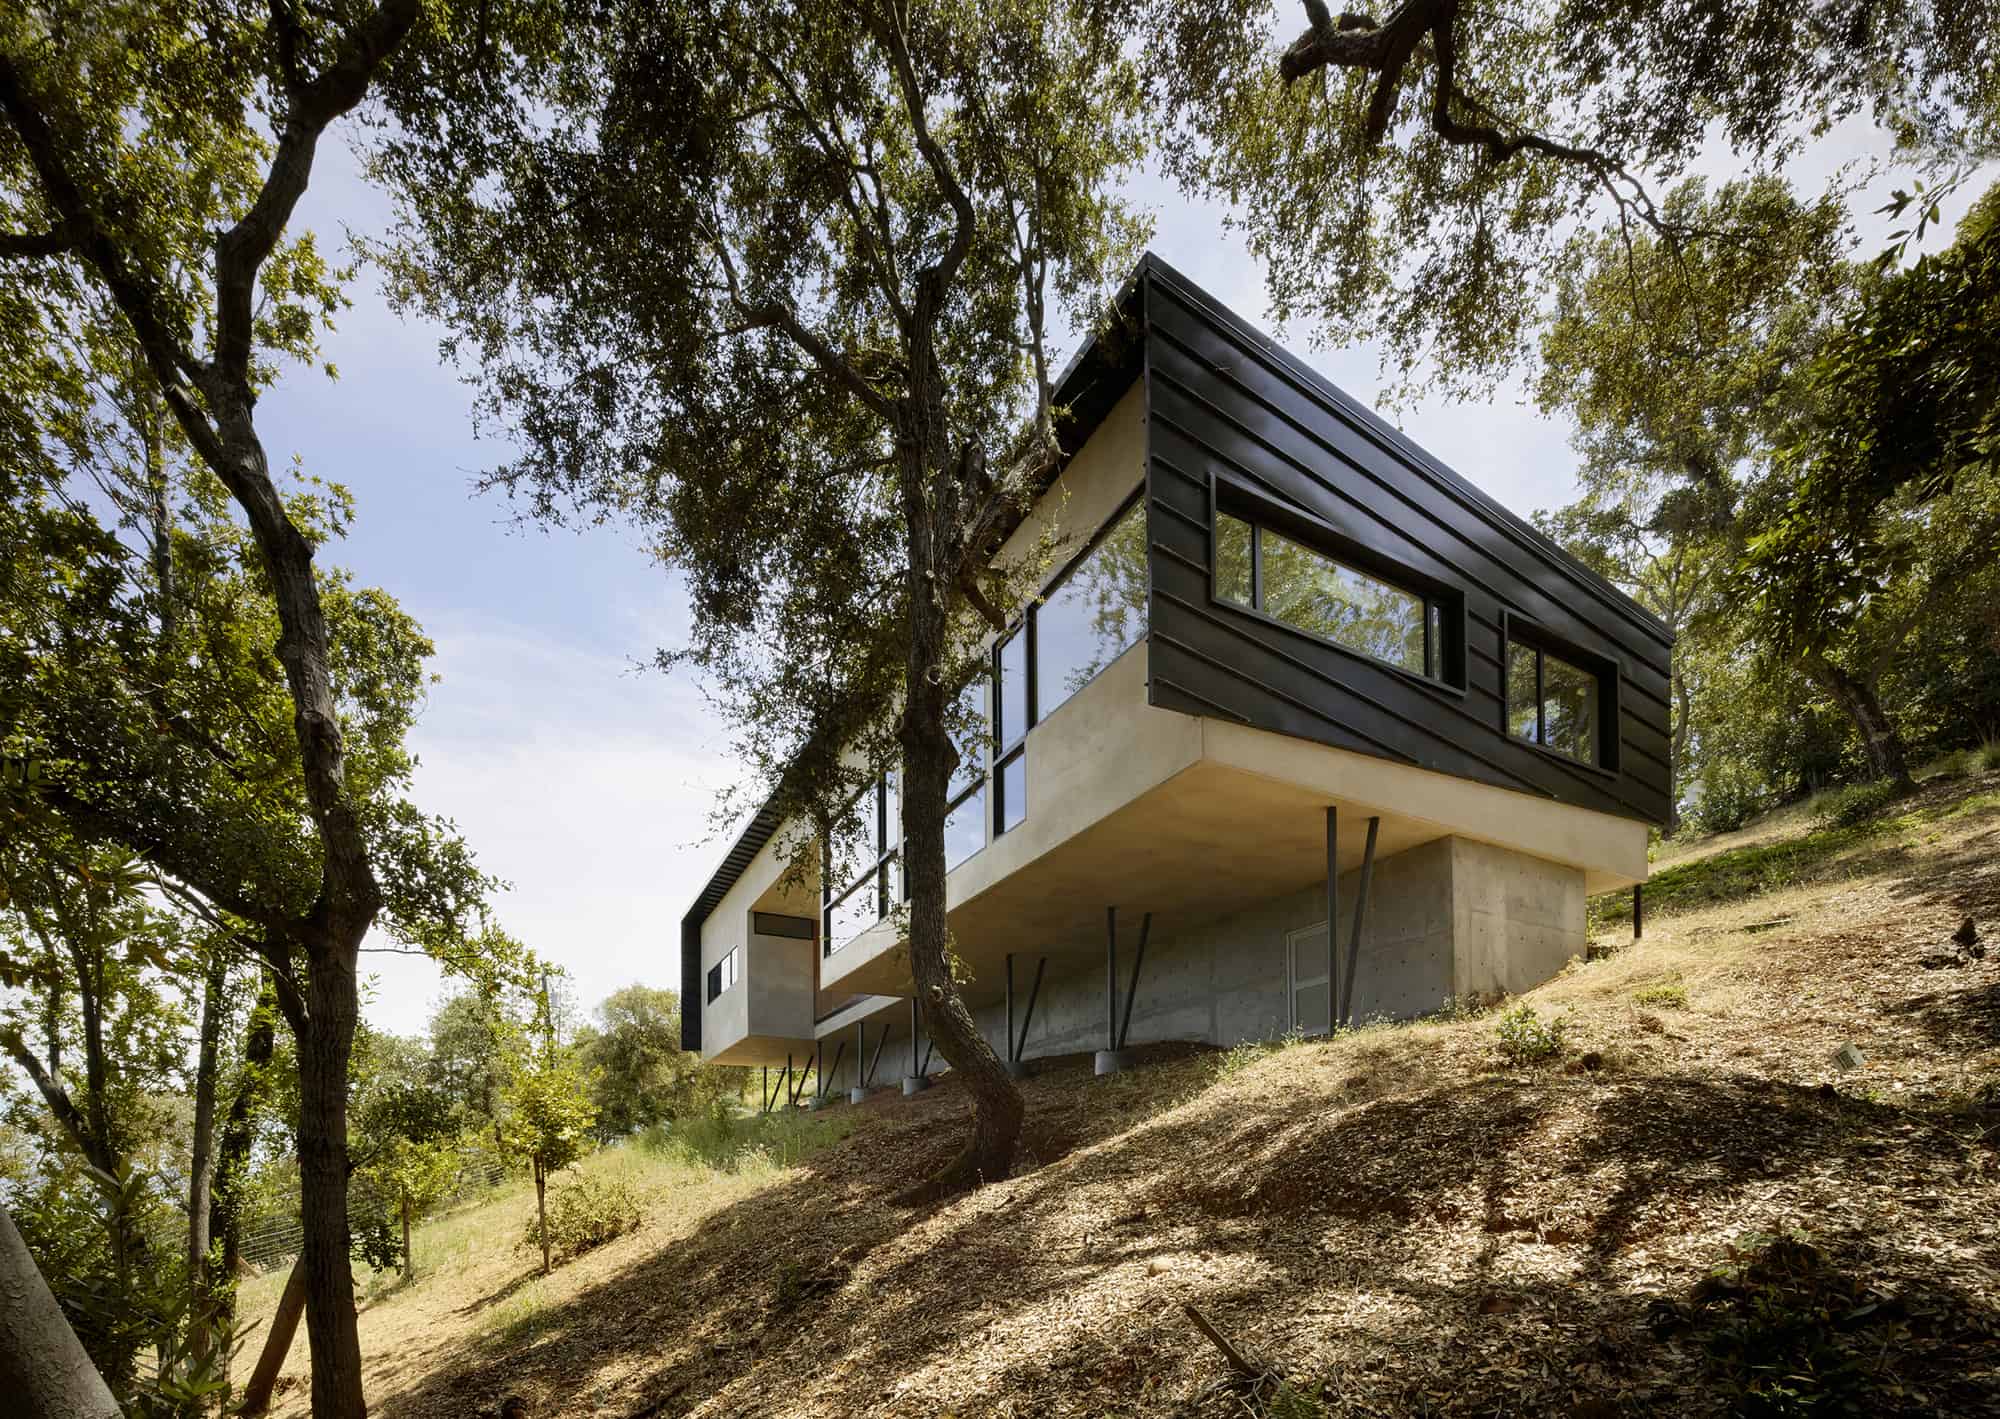 3 gorgeous house mobility impaired cantilevers steep slope